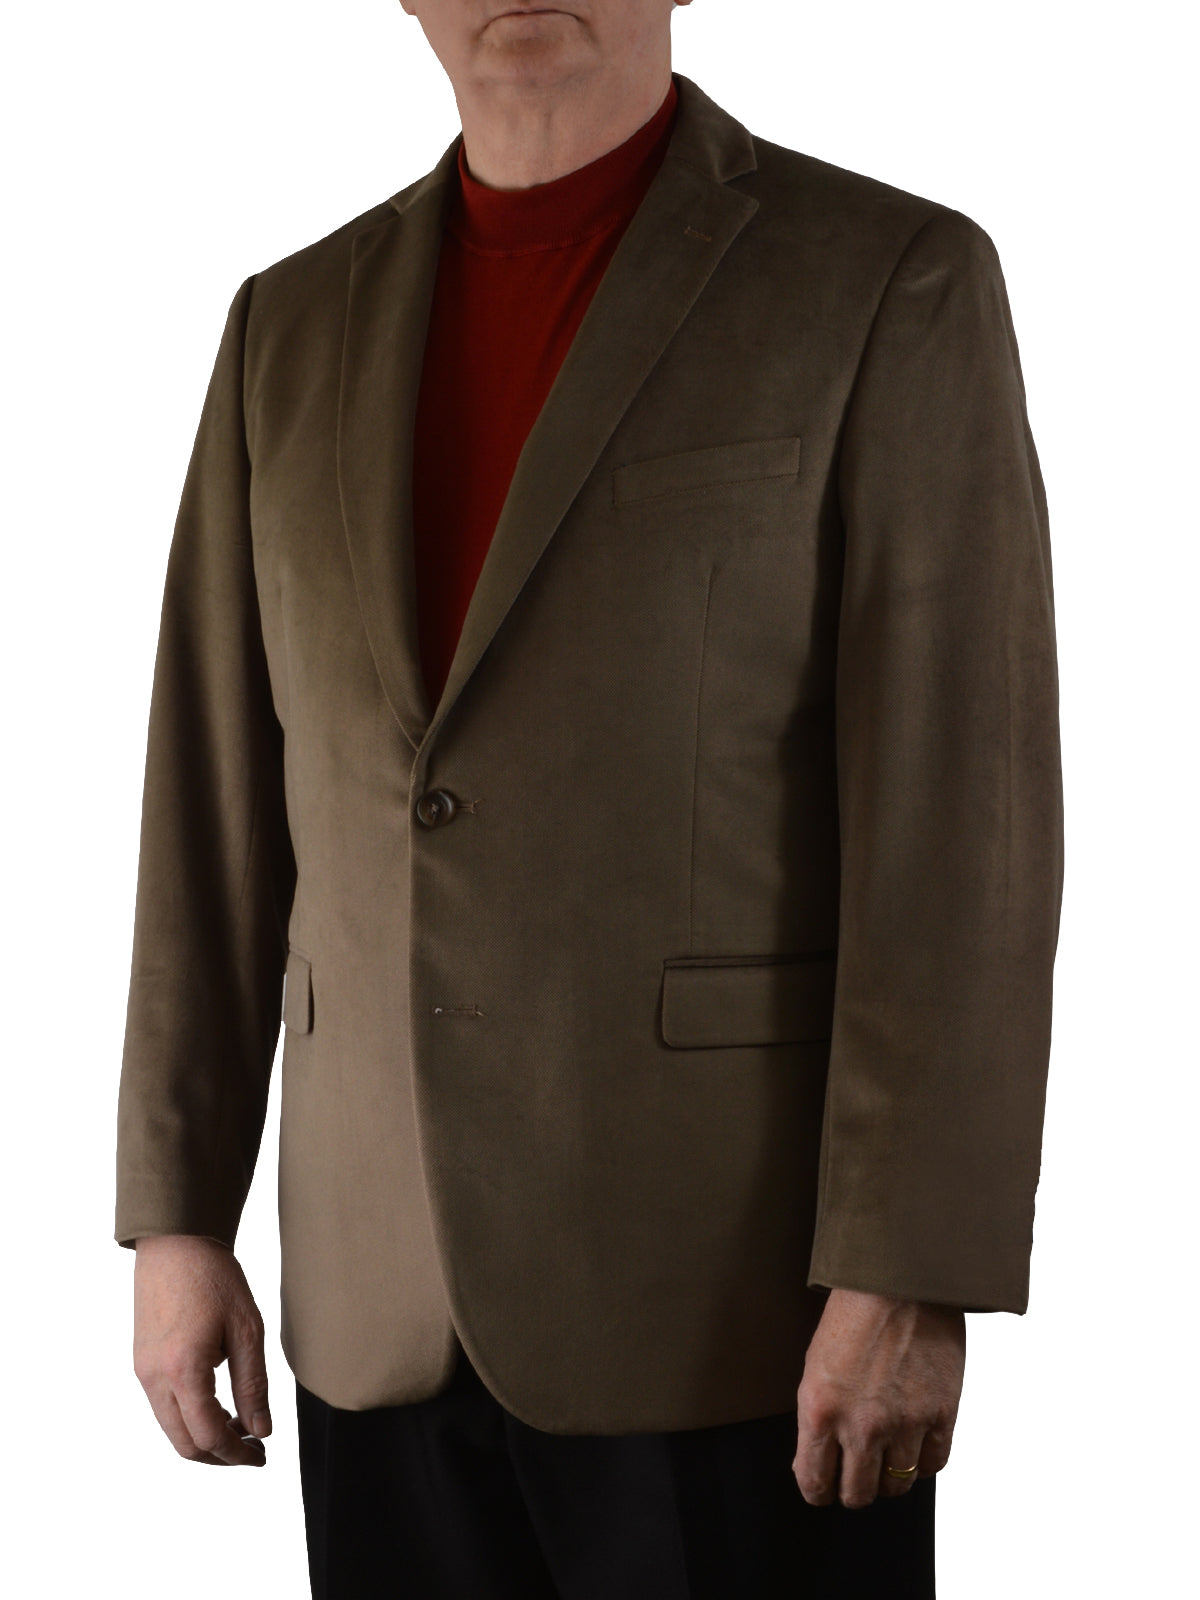 Jean-Paul Germain Contemporary Fit Polyester Sportcoats by Harmony